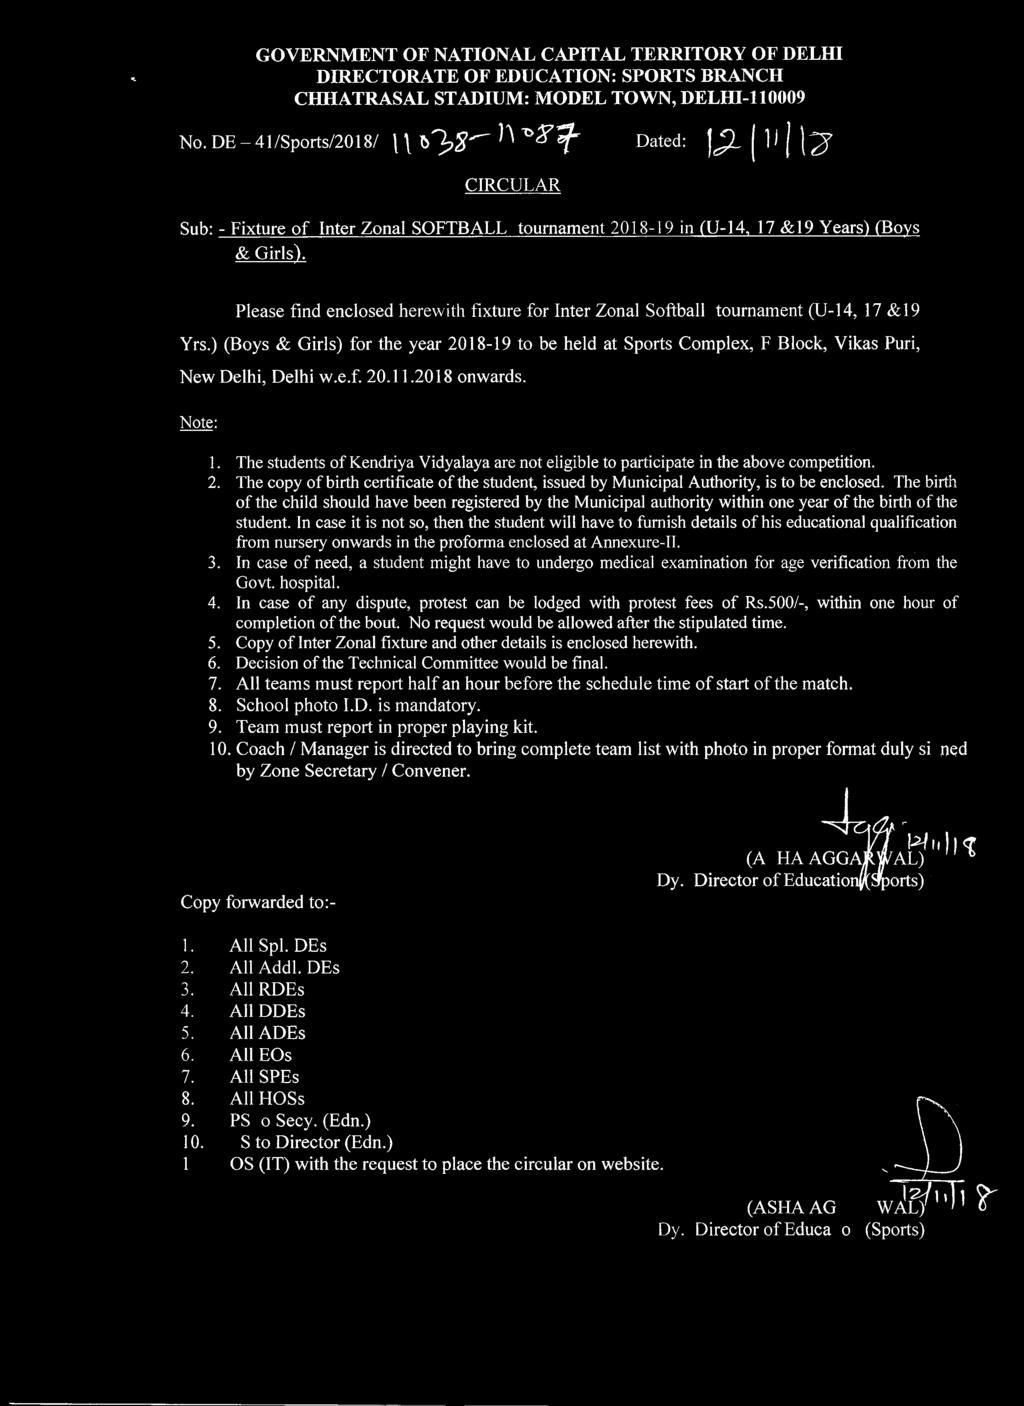 ) (Boys & Girls) for the year 2018-19 to be held at Sports Complex, F Block, Vikas Puri, New Delhi, Delhi w.e.f. 20.11.2018 onwards. Note: 1.